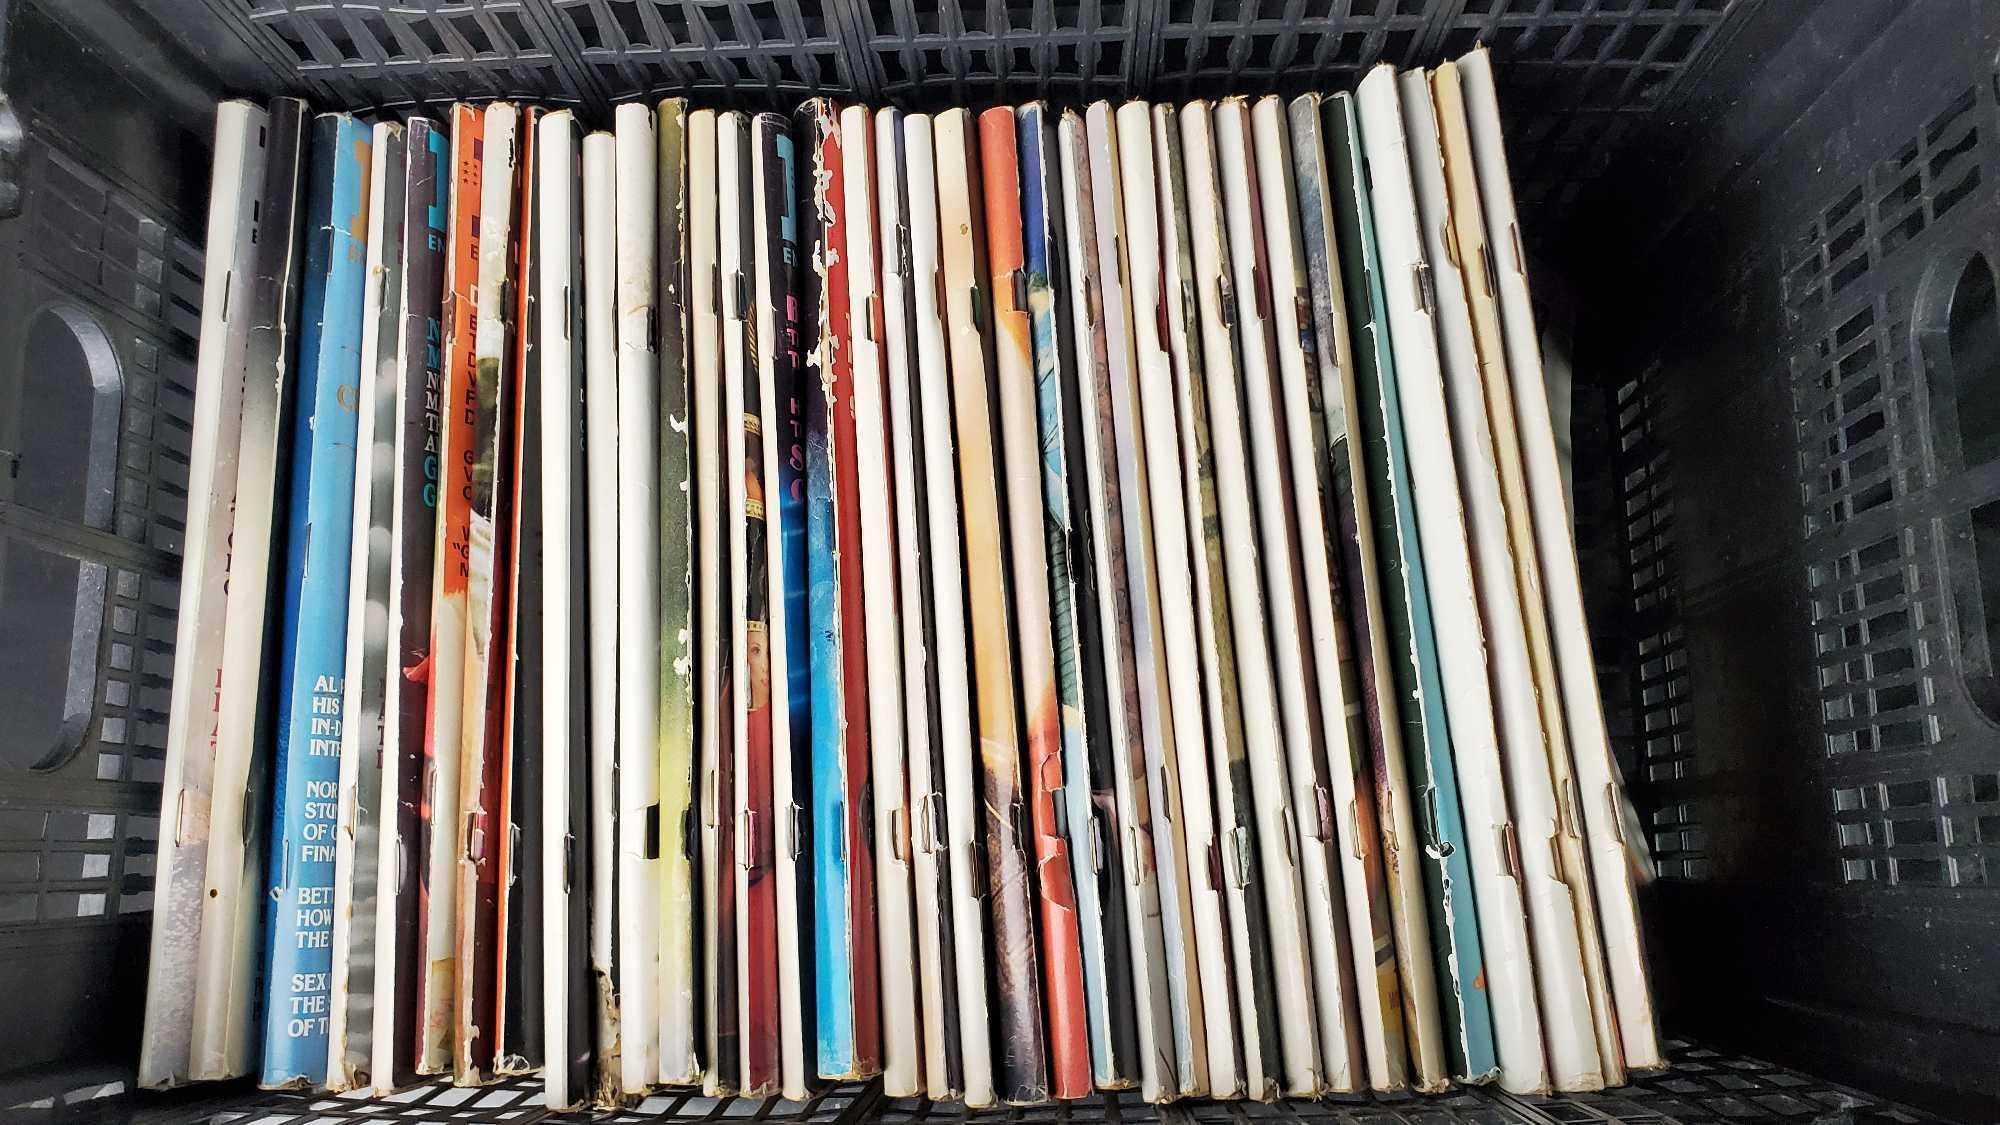 Large crate of approx. 35 vintage Playboy adult entertainment magazines 1975-1979